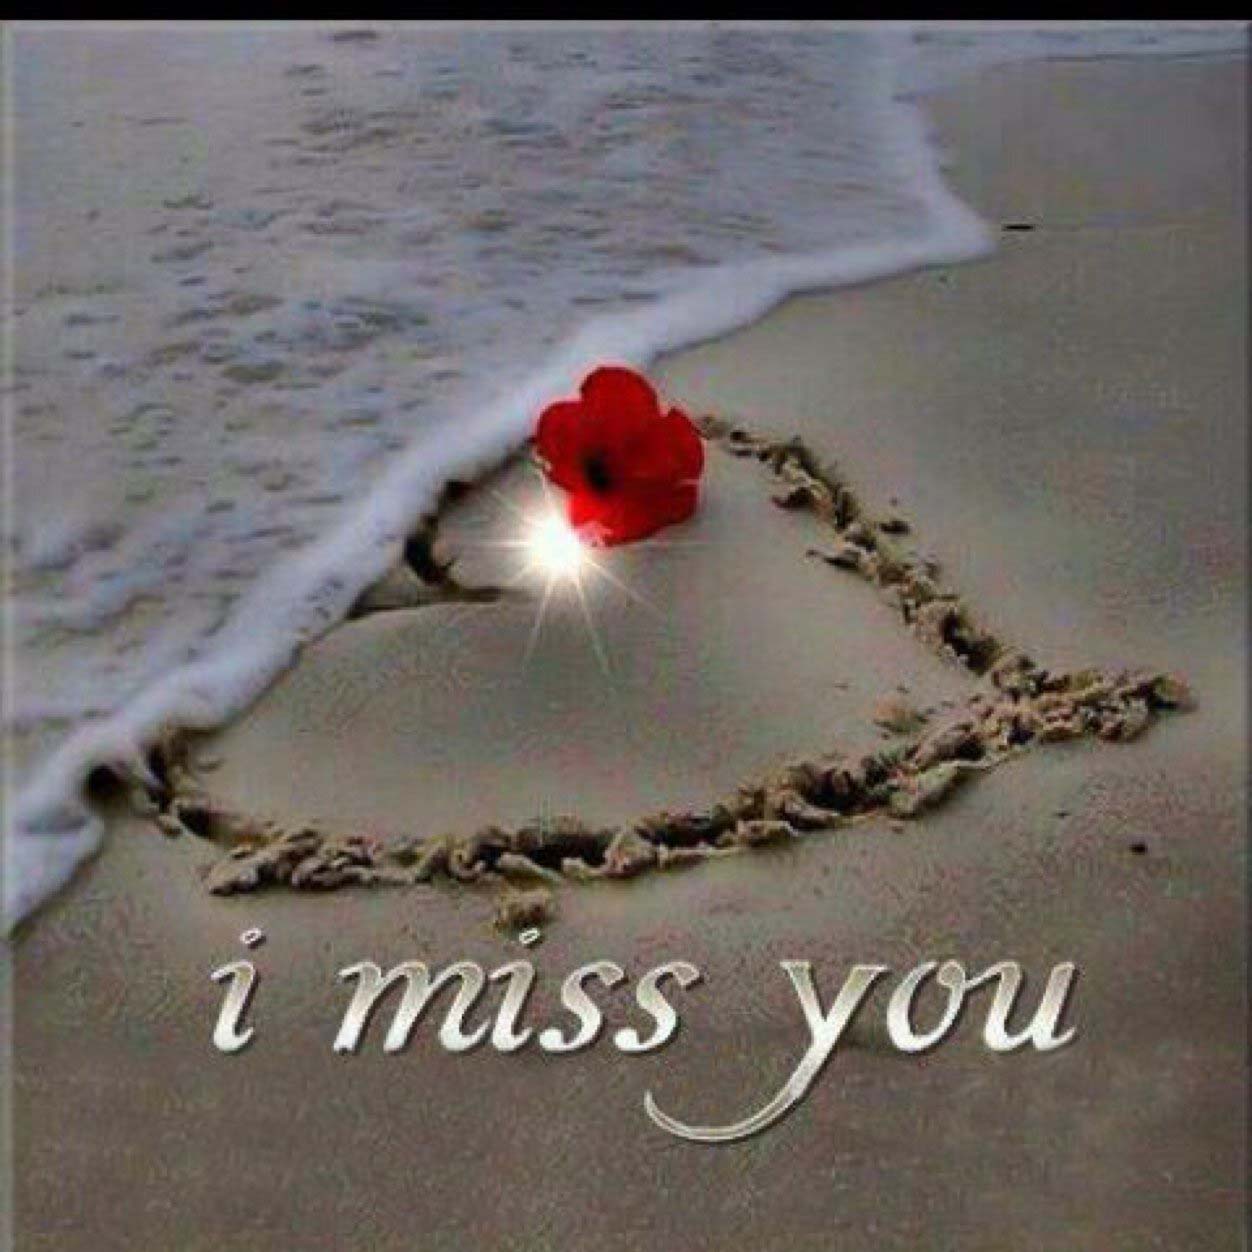 beautiful i miss you images